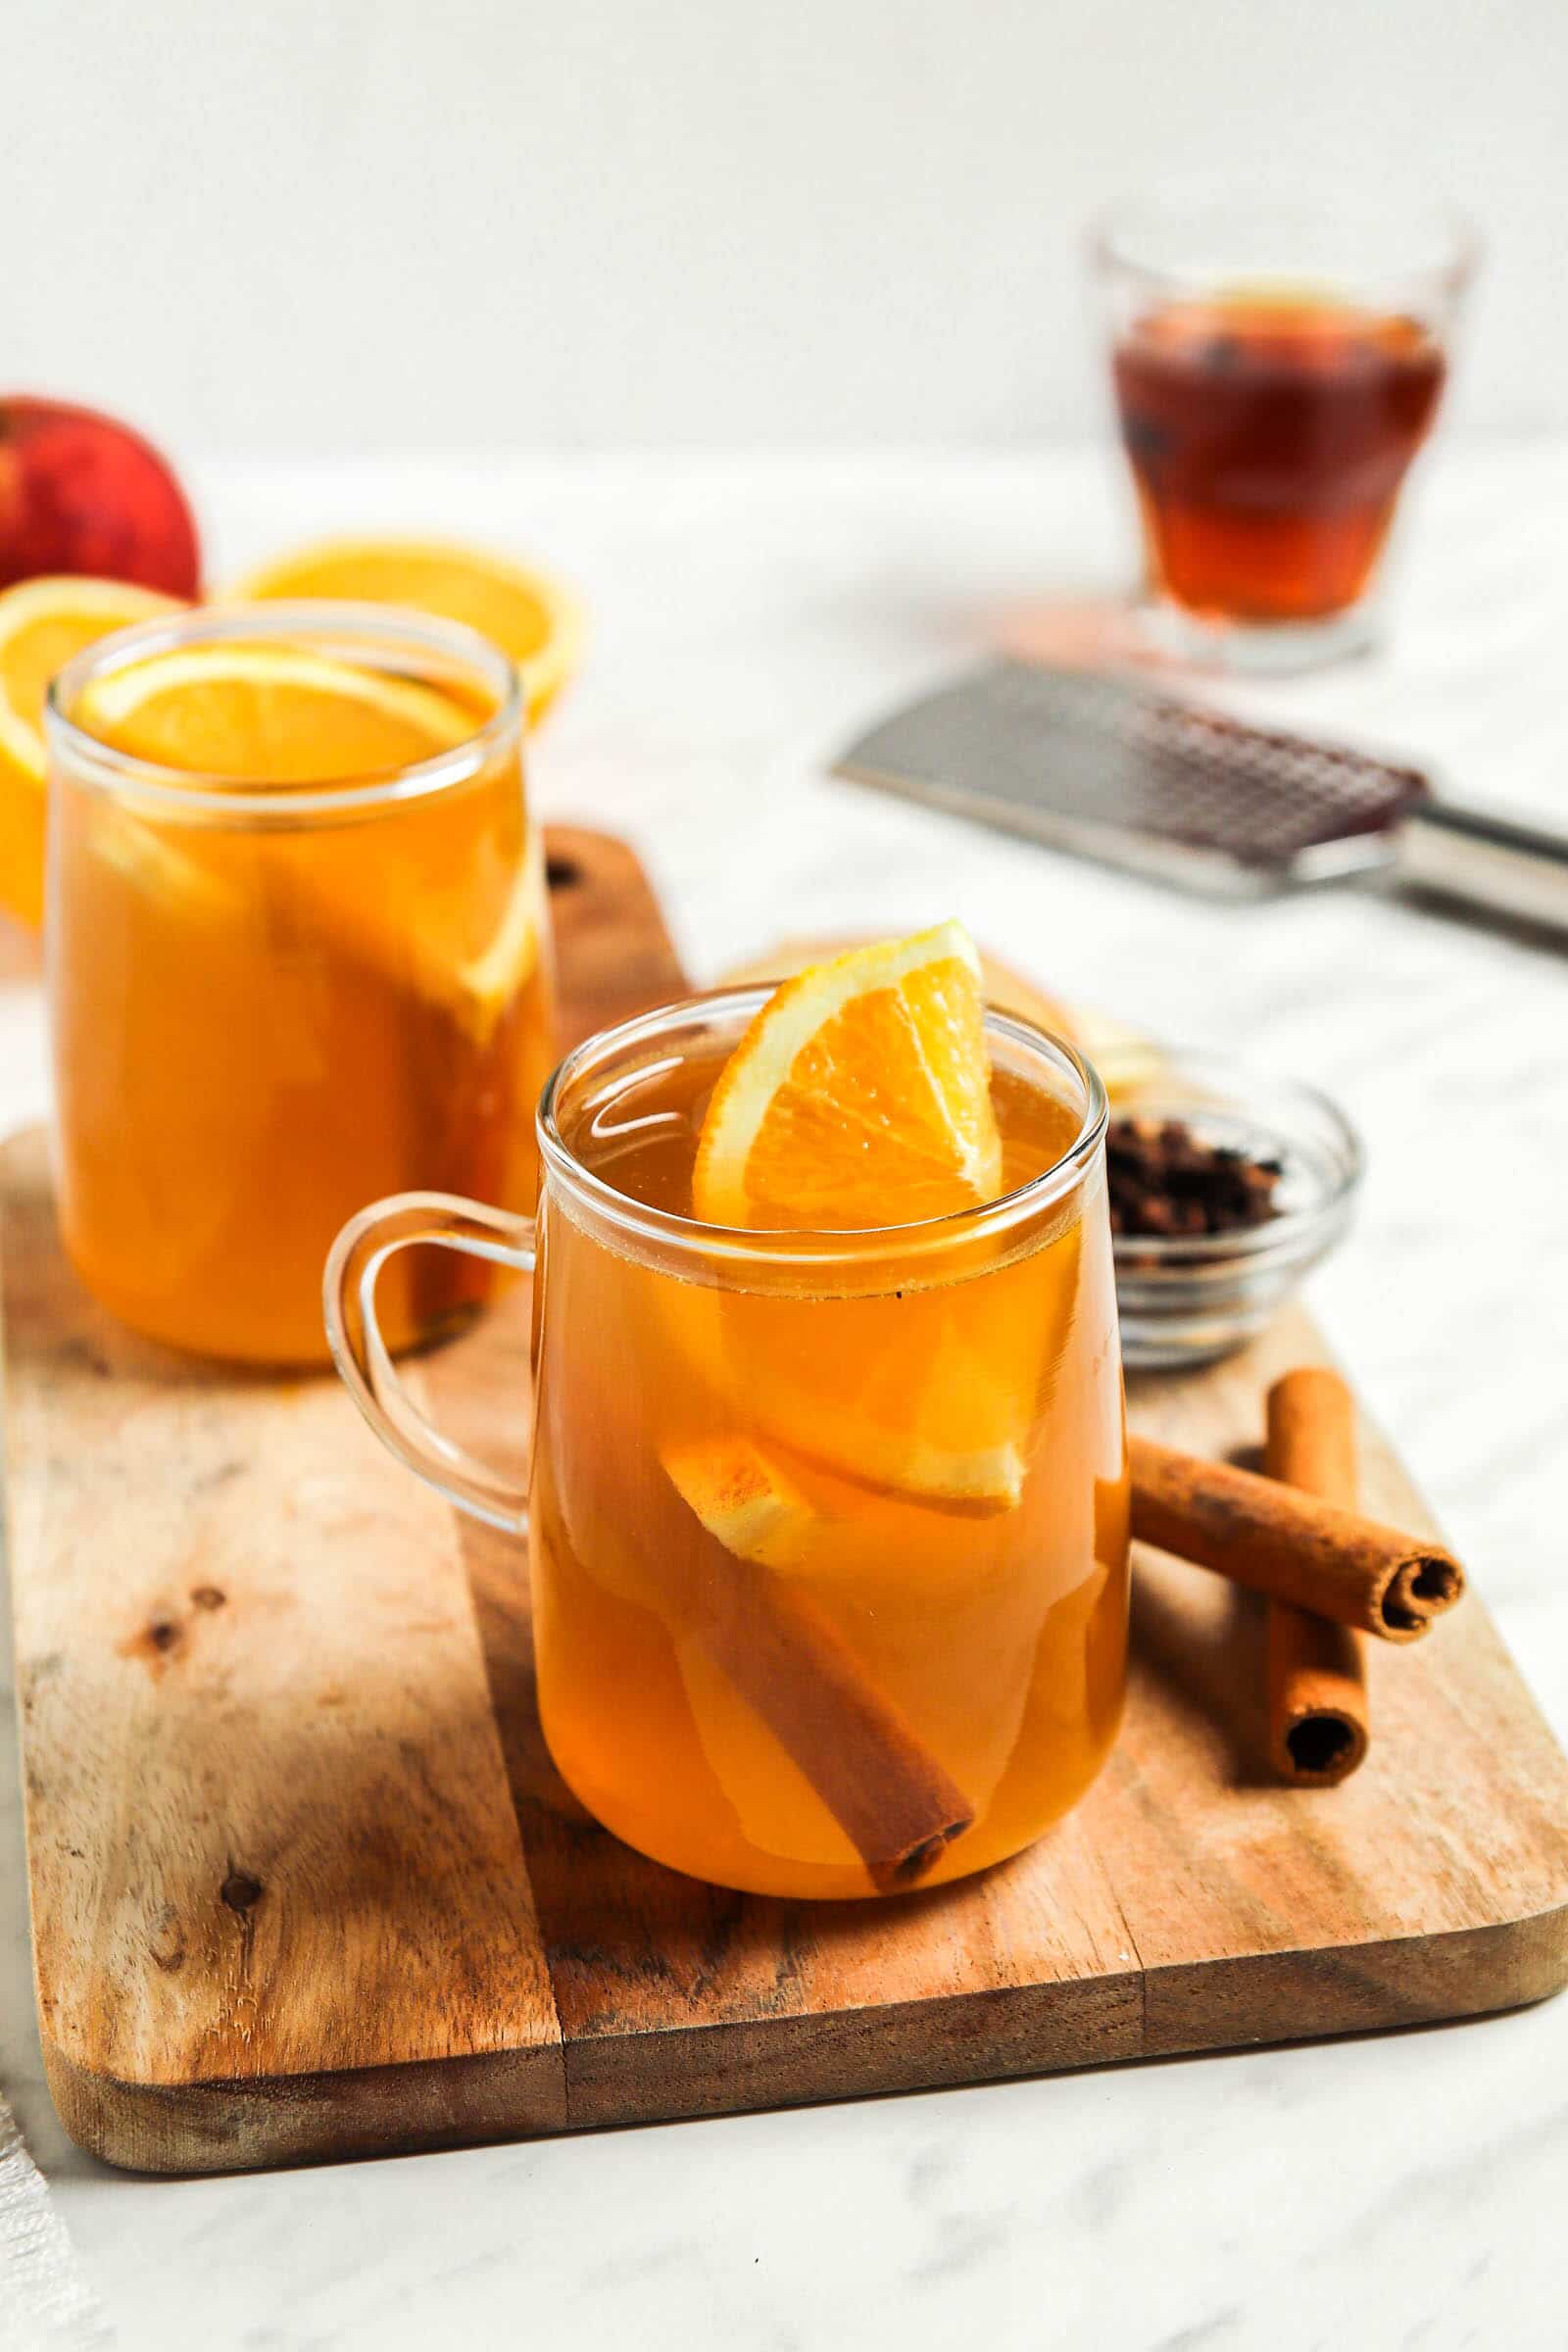 Two clear glasses of spiked apple cider on a wood board with sliced orange in them.